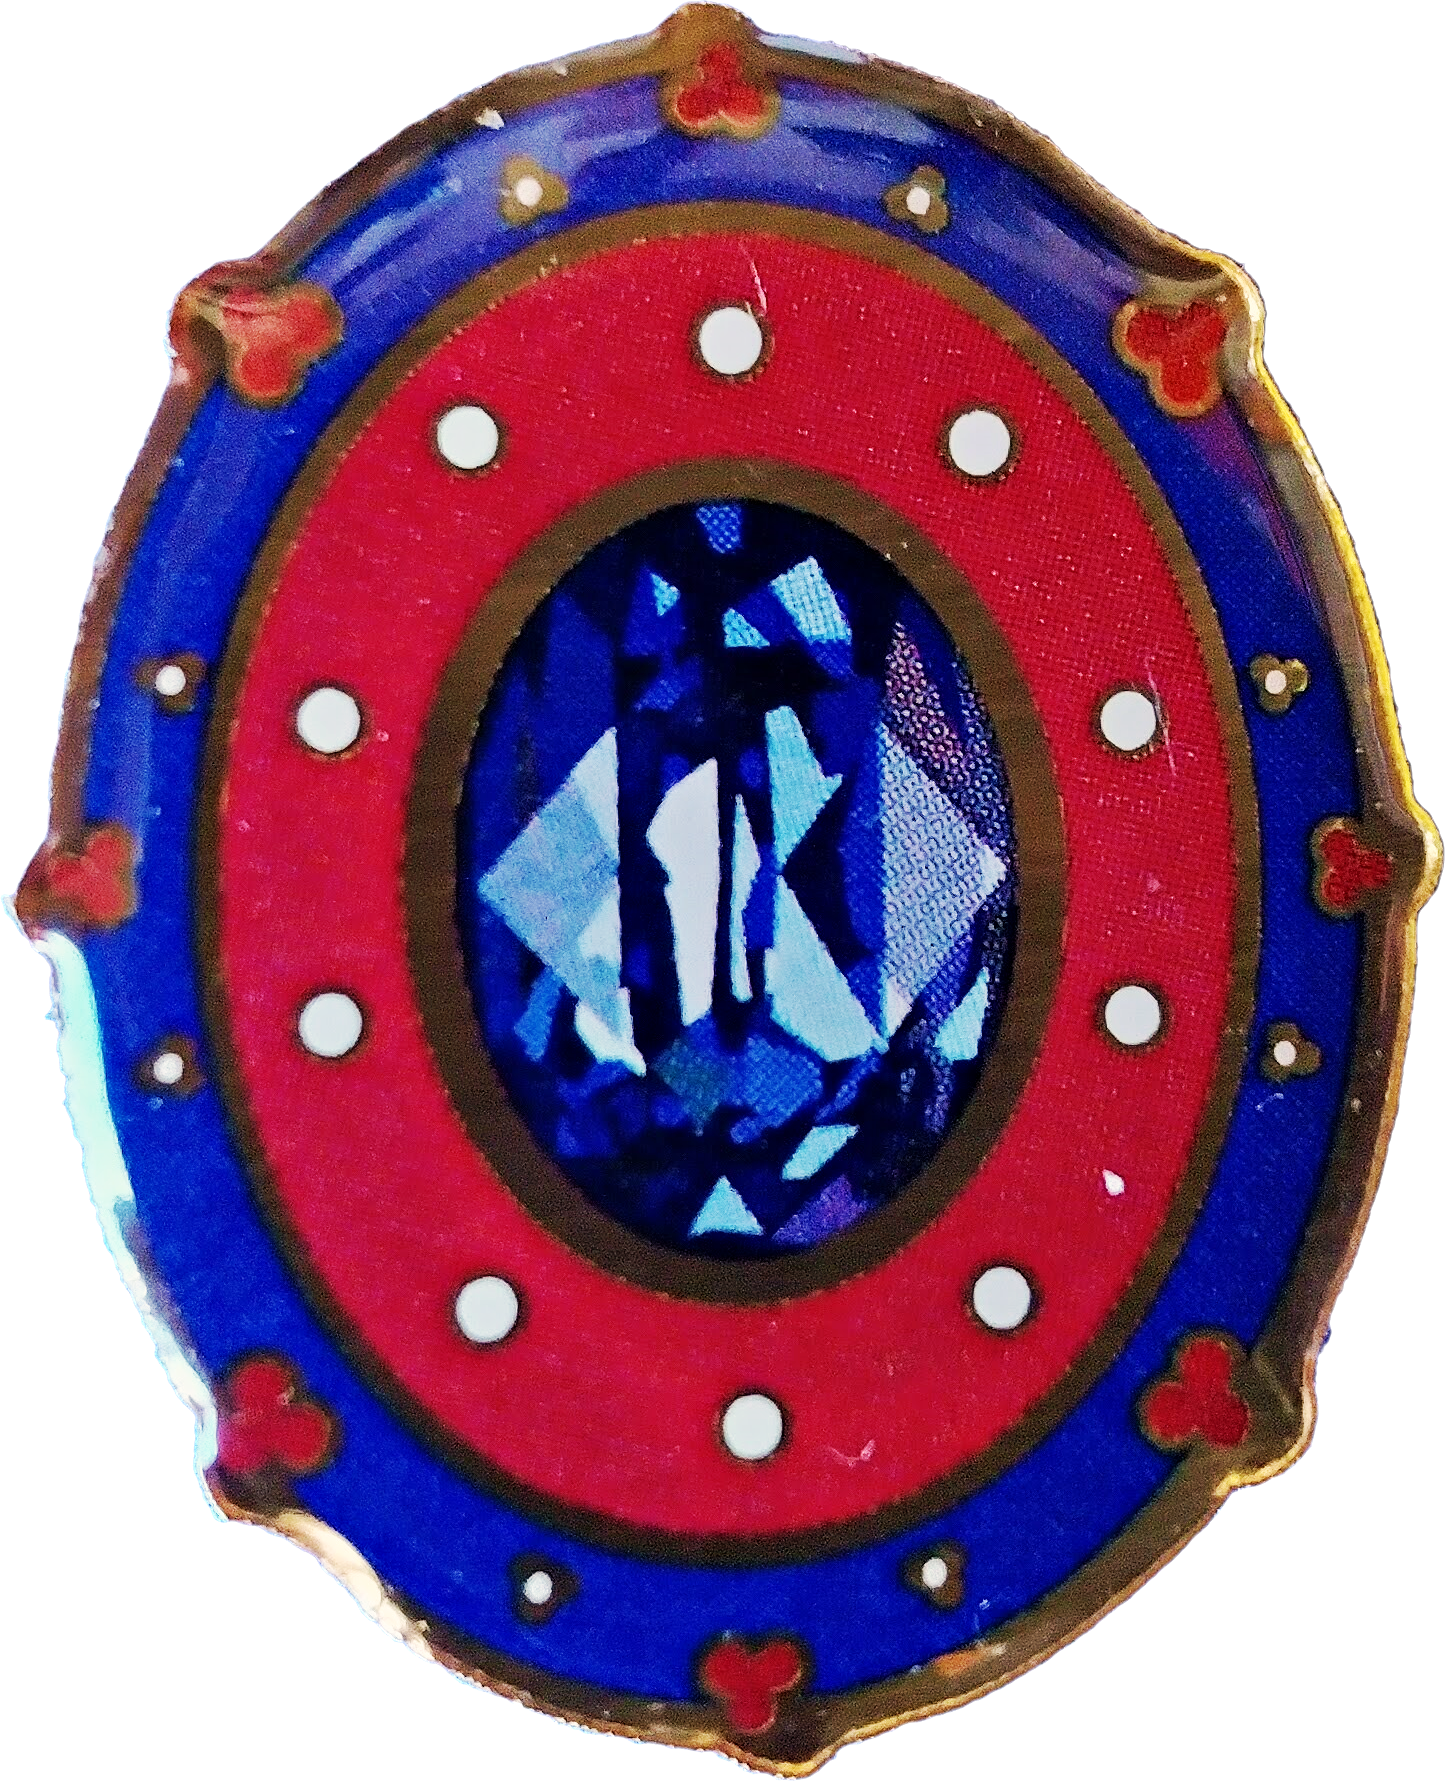 An oval pin with a blue and red artistic design